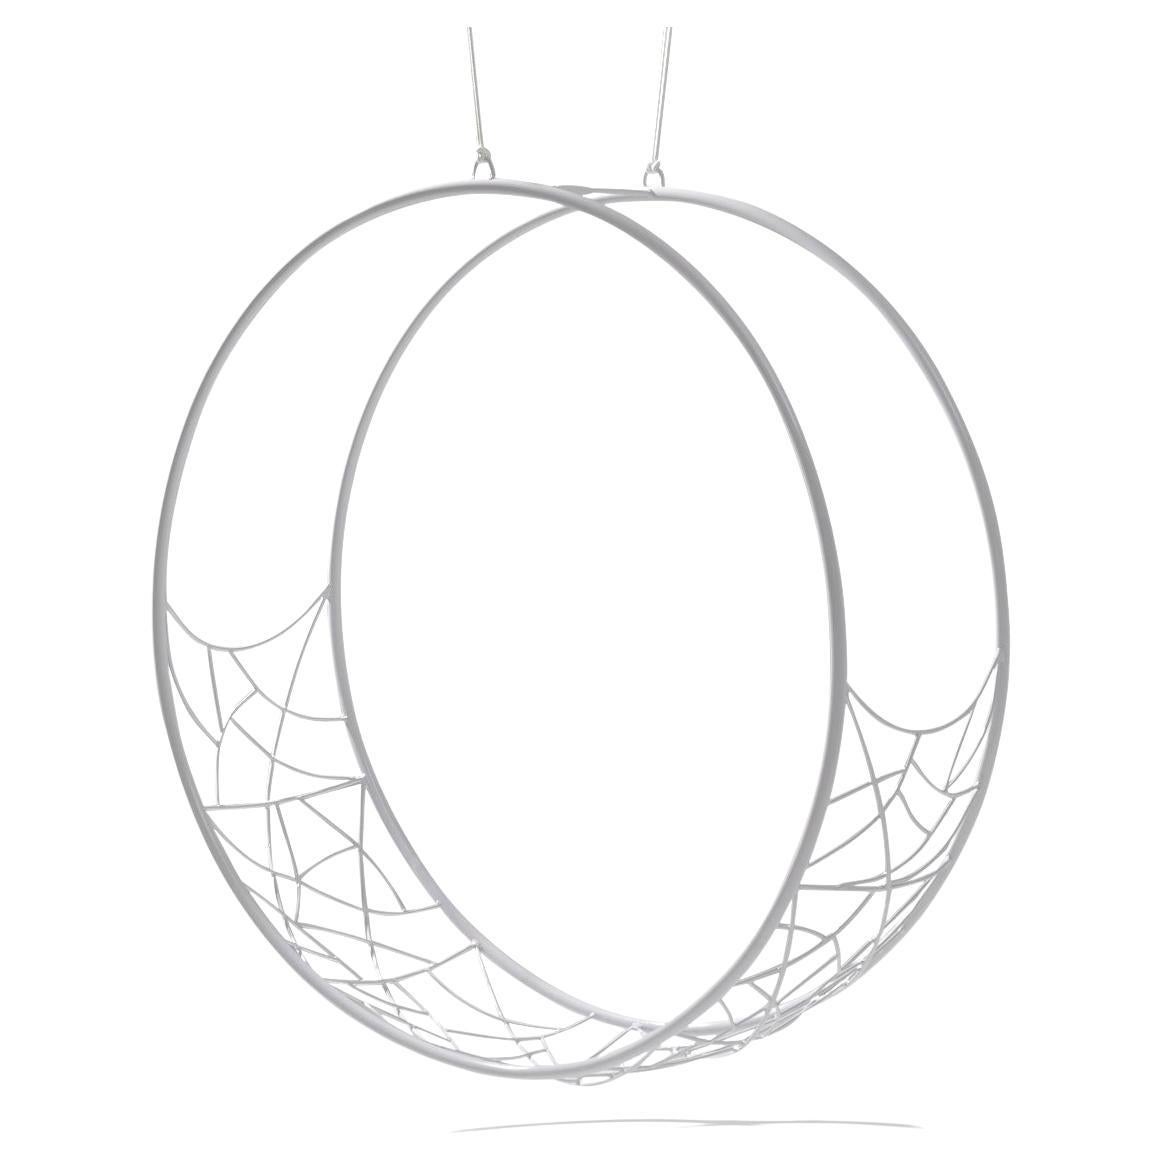 Modern Circular Hanging Chair in Pieces for Economic Shipping For Sale